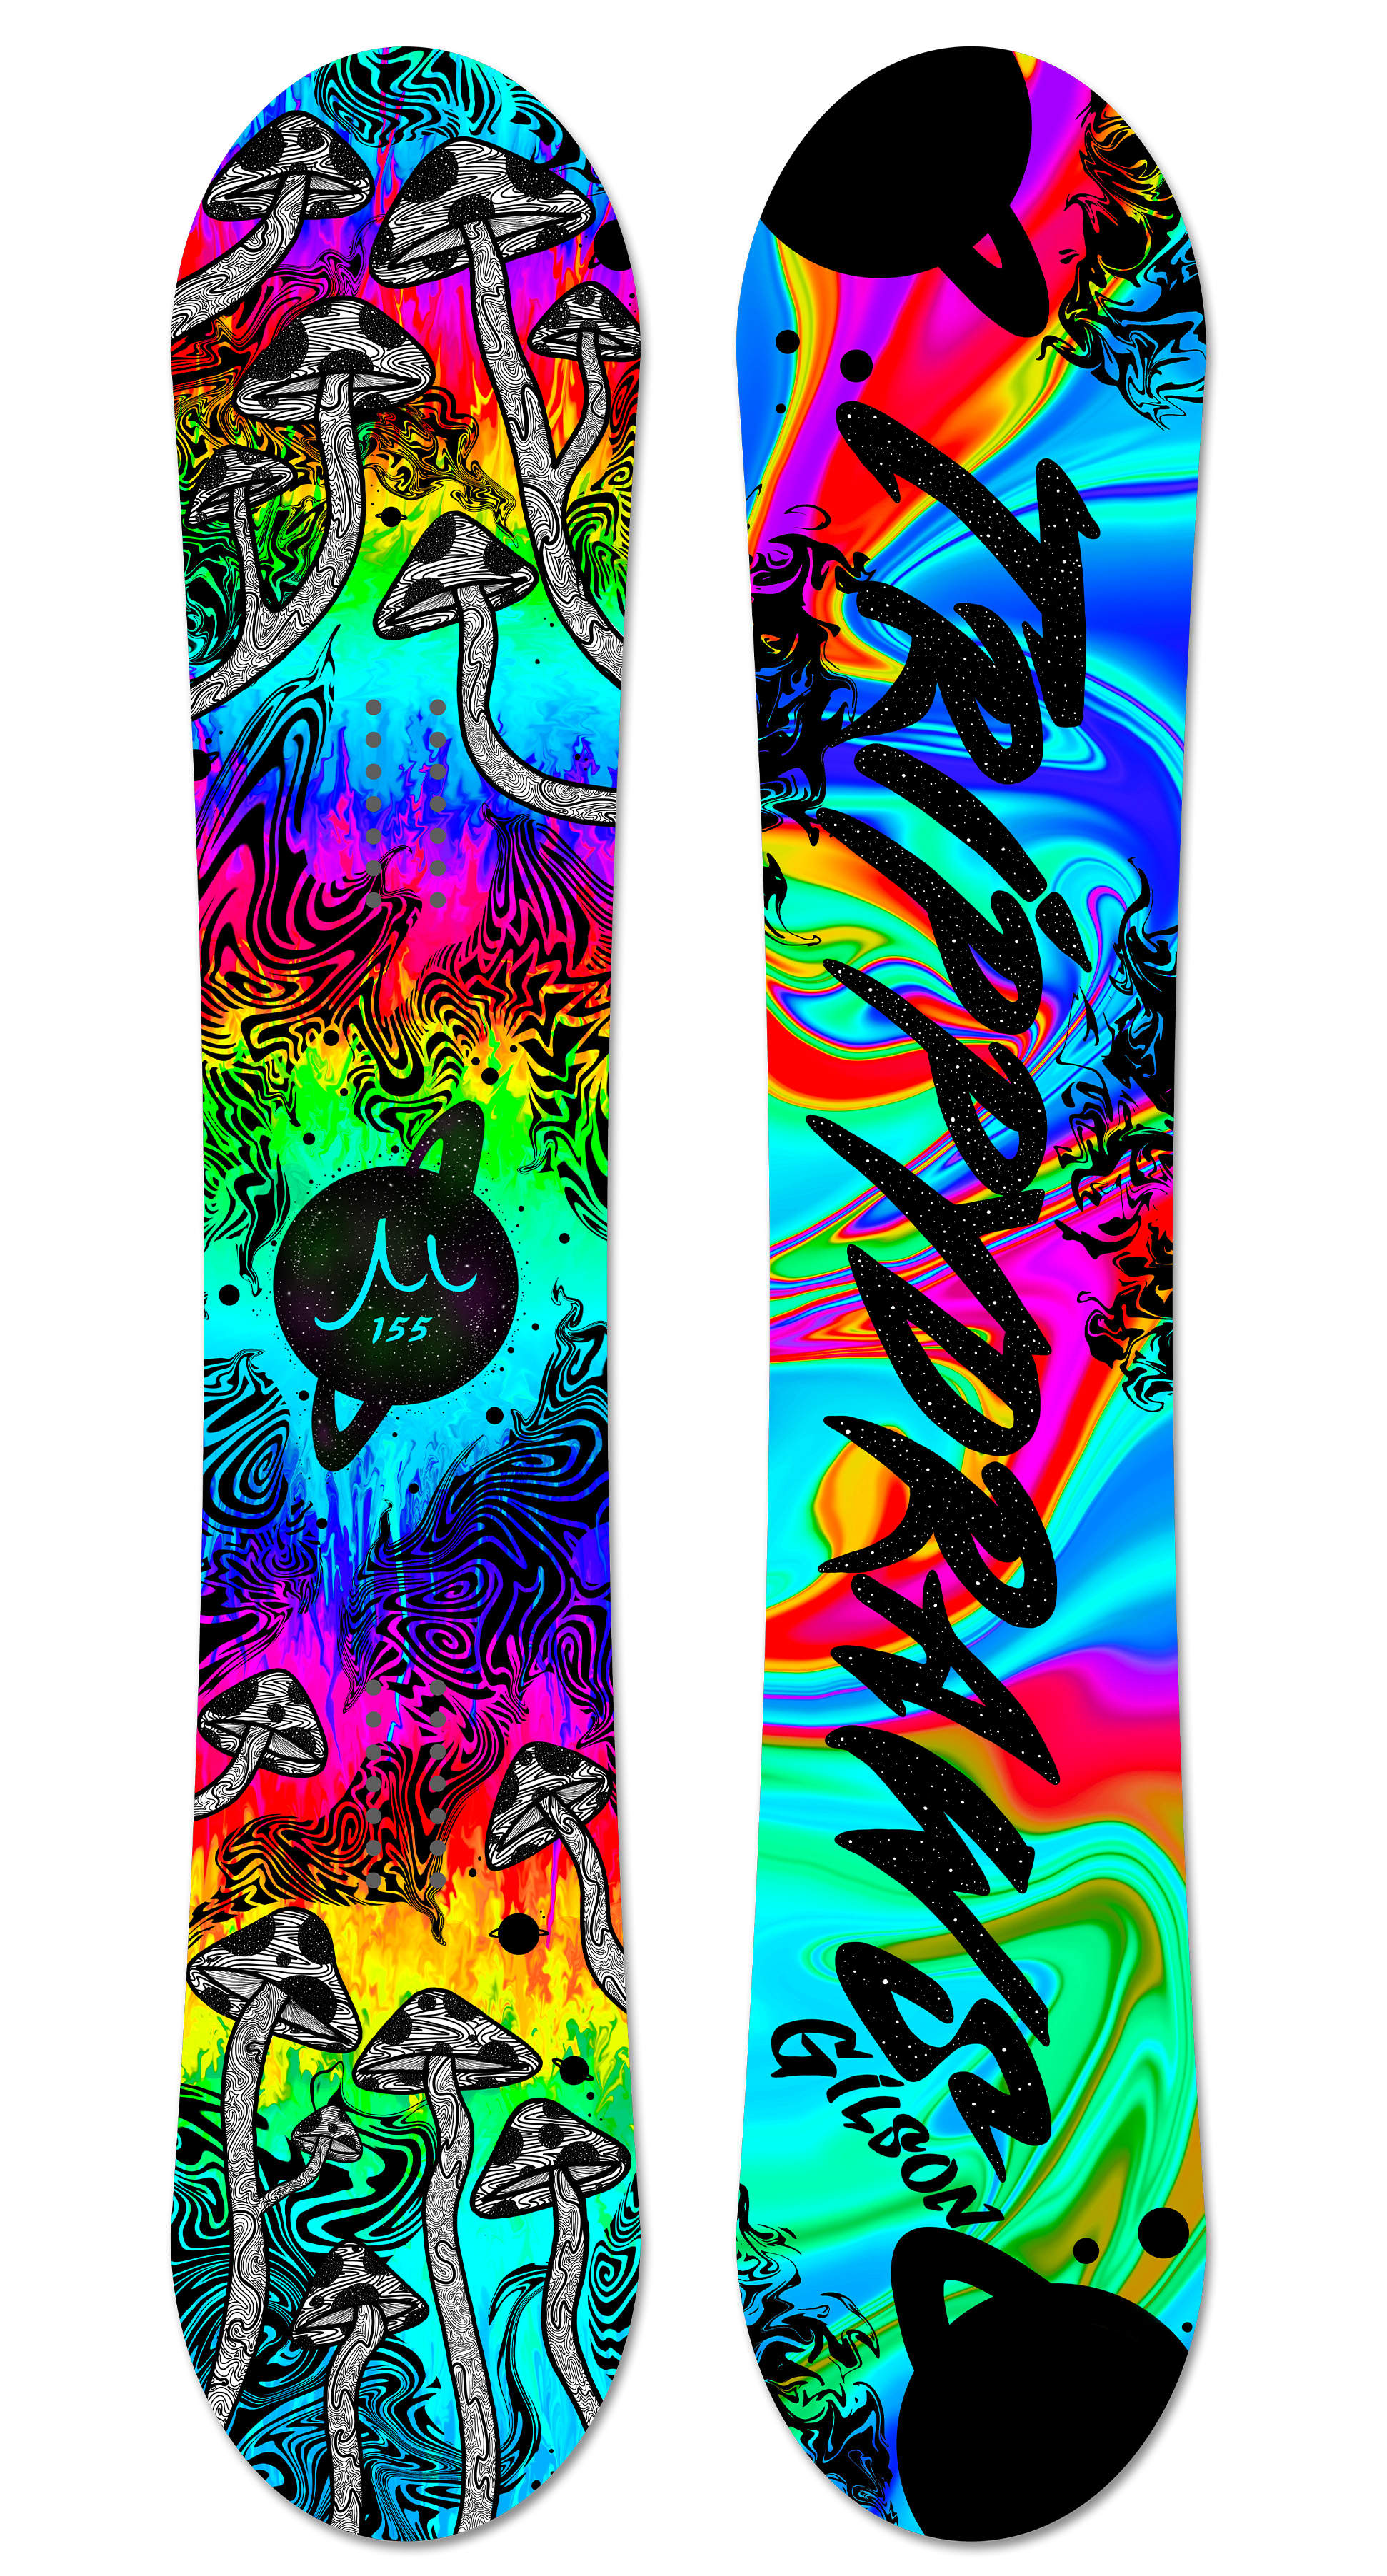 Bandiet Overleving Individualiteit American Made Snowboards - TRIPPY Limited | Gilson Snow